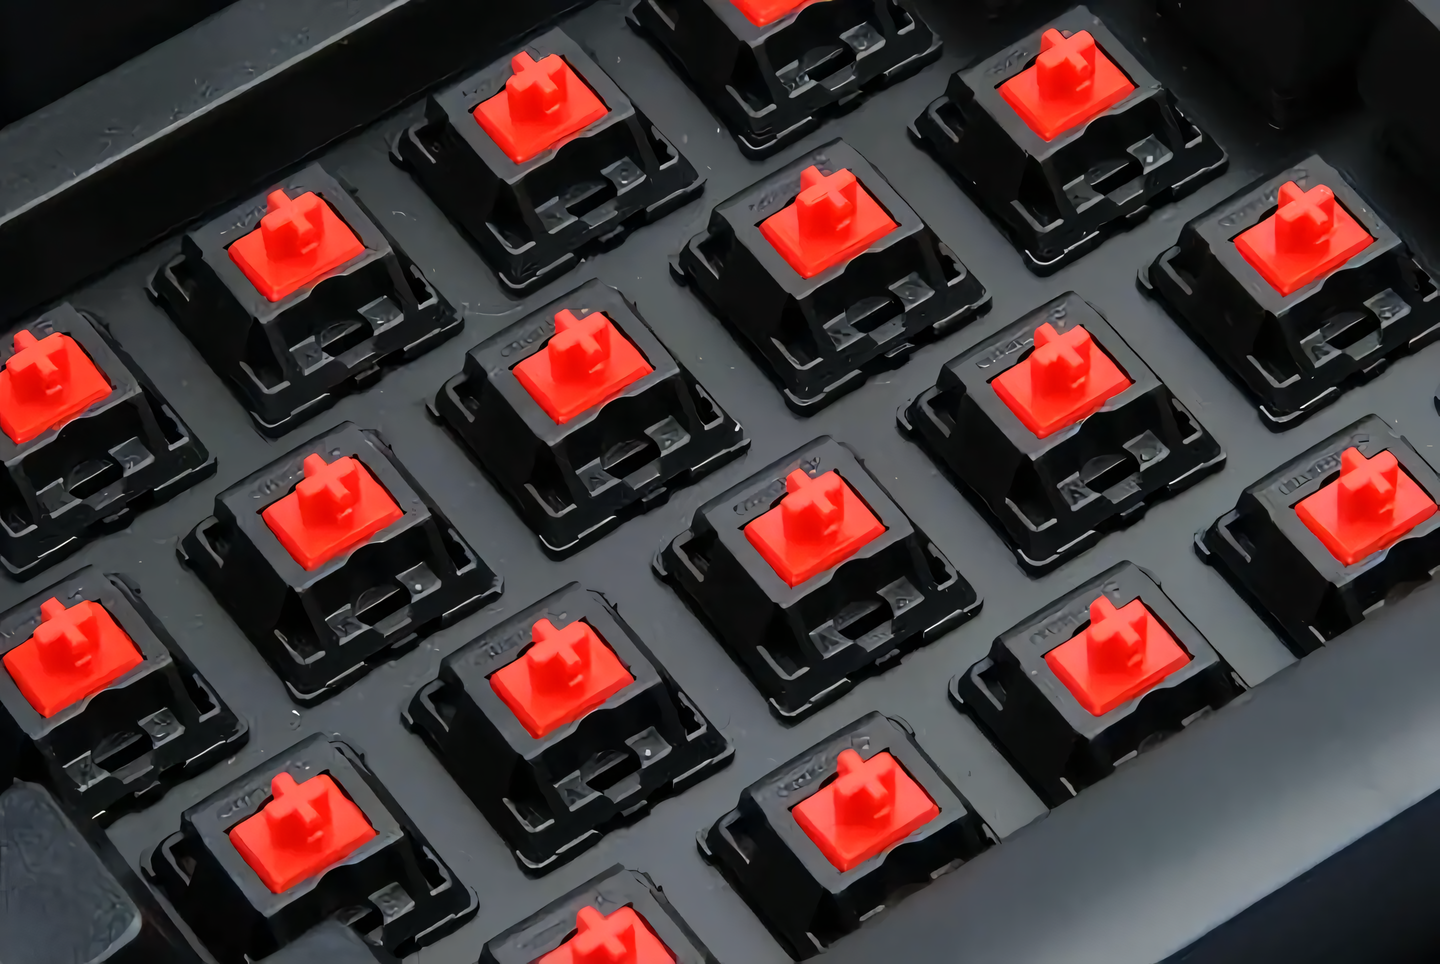 THE COMPREHENSIVE GUIDE TO LINEAR MECHANICAL SWITCHES